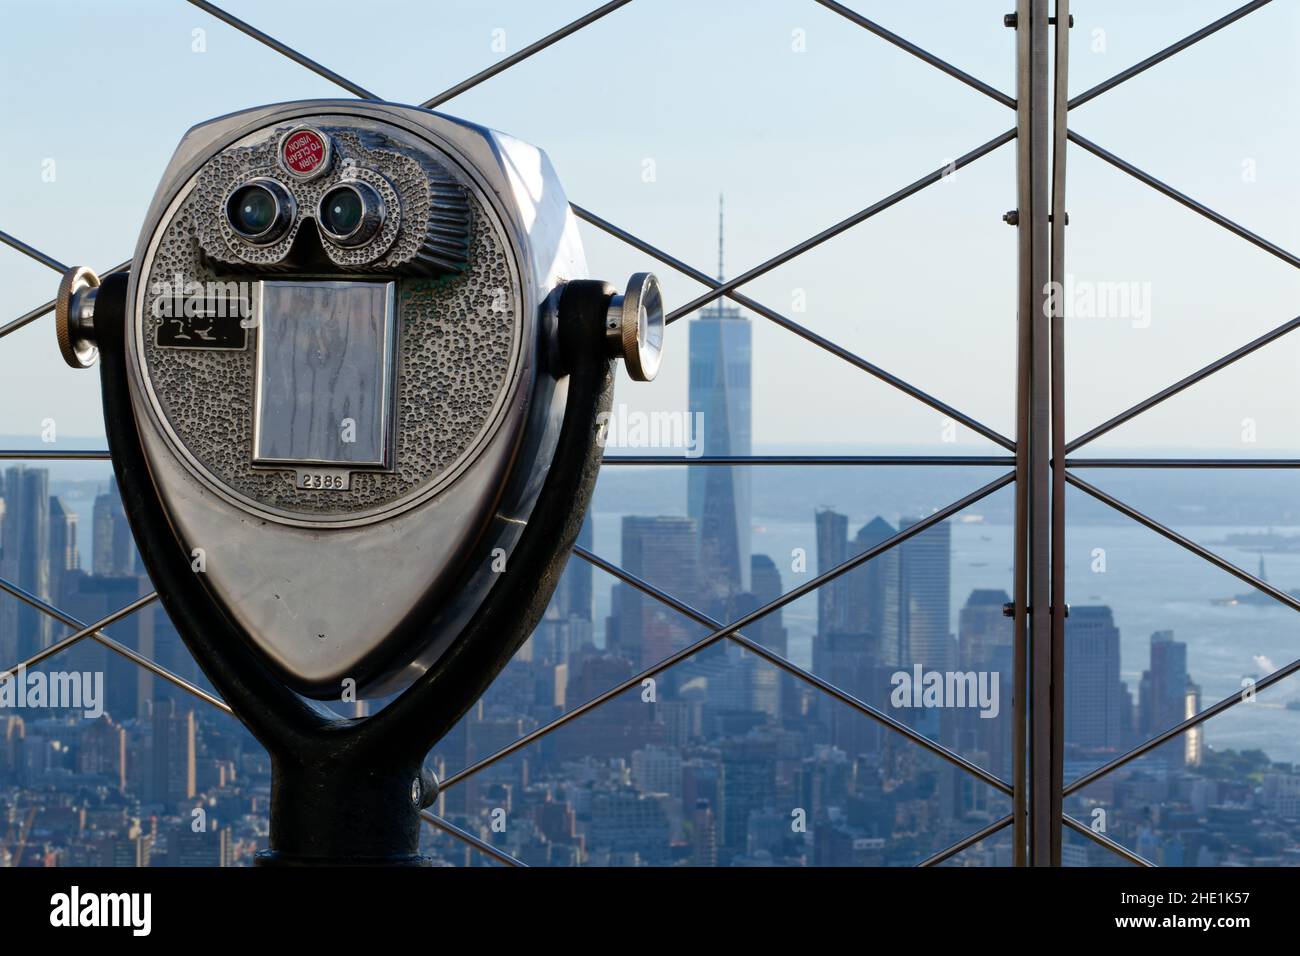 Viewing binoculars wait patiently at the top of the Empire State Building, overlooking Manhattan Island. Stock Photo